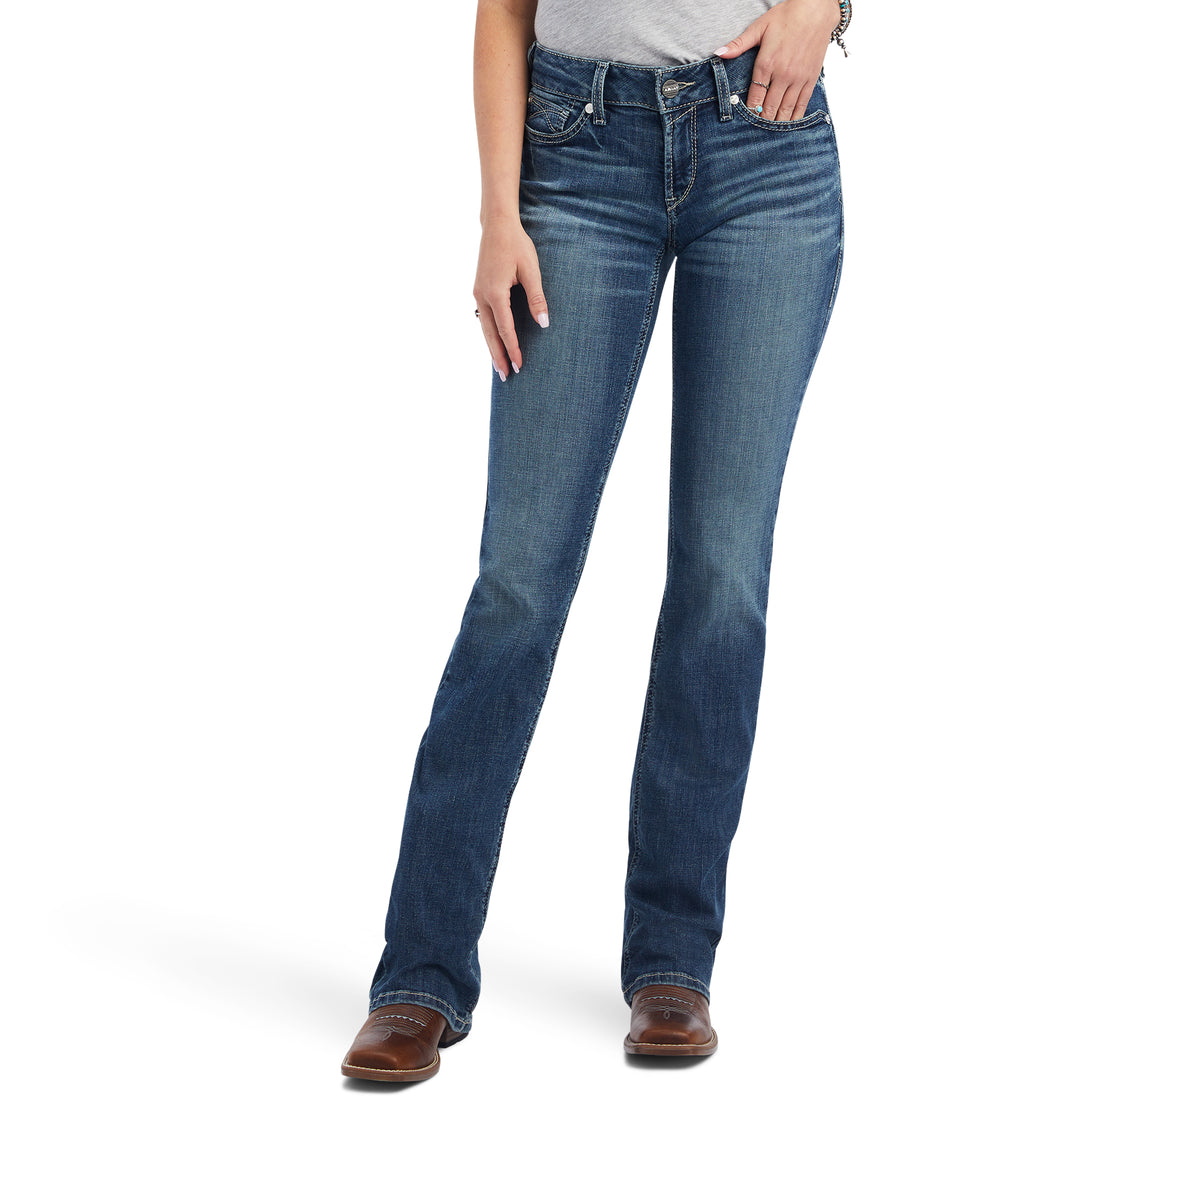 Ariat Womens Real Mid Rise Boot Cut jean - Maisie Torrance